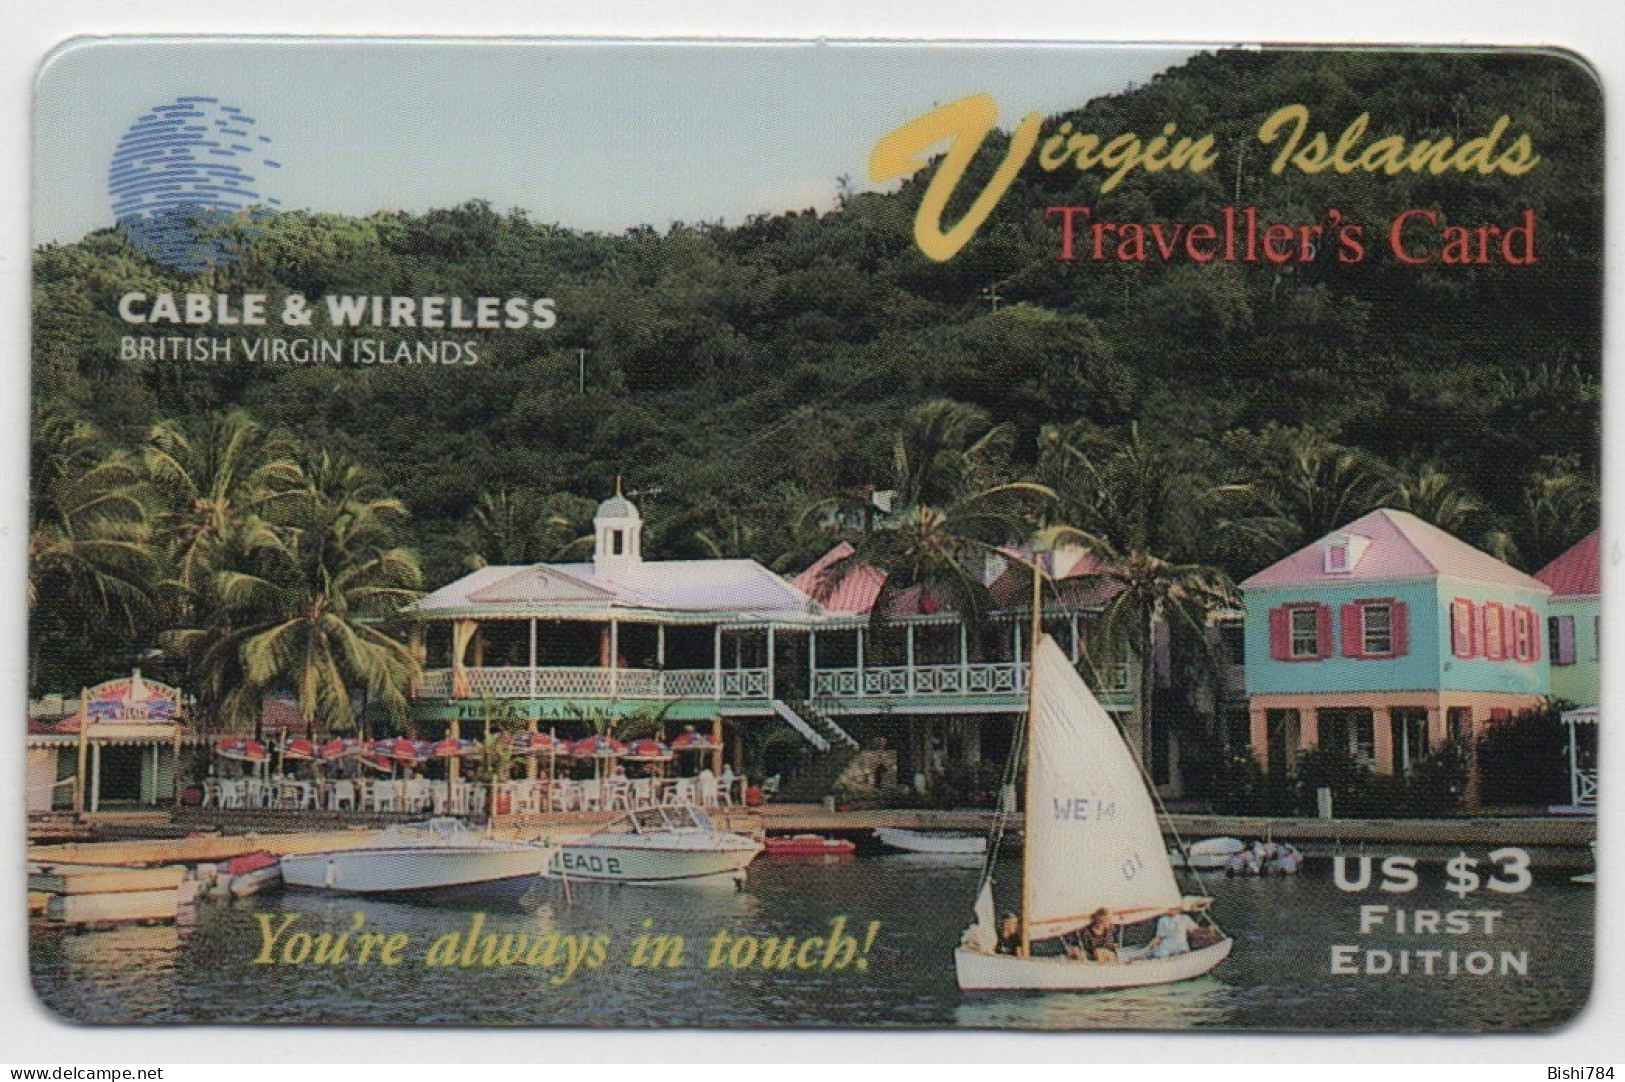 British Virgin Islands - Traveller’s Card $3 First Edition (7/30/1996) USED - Vierges (îles)